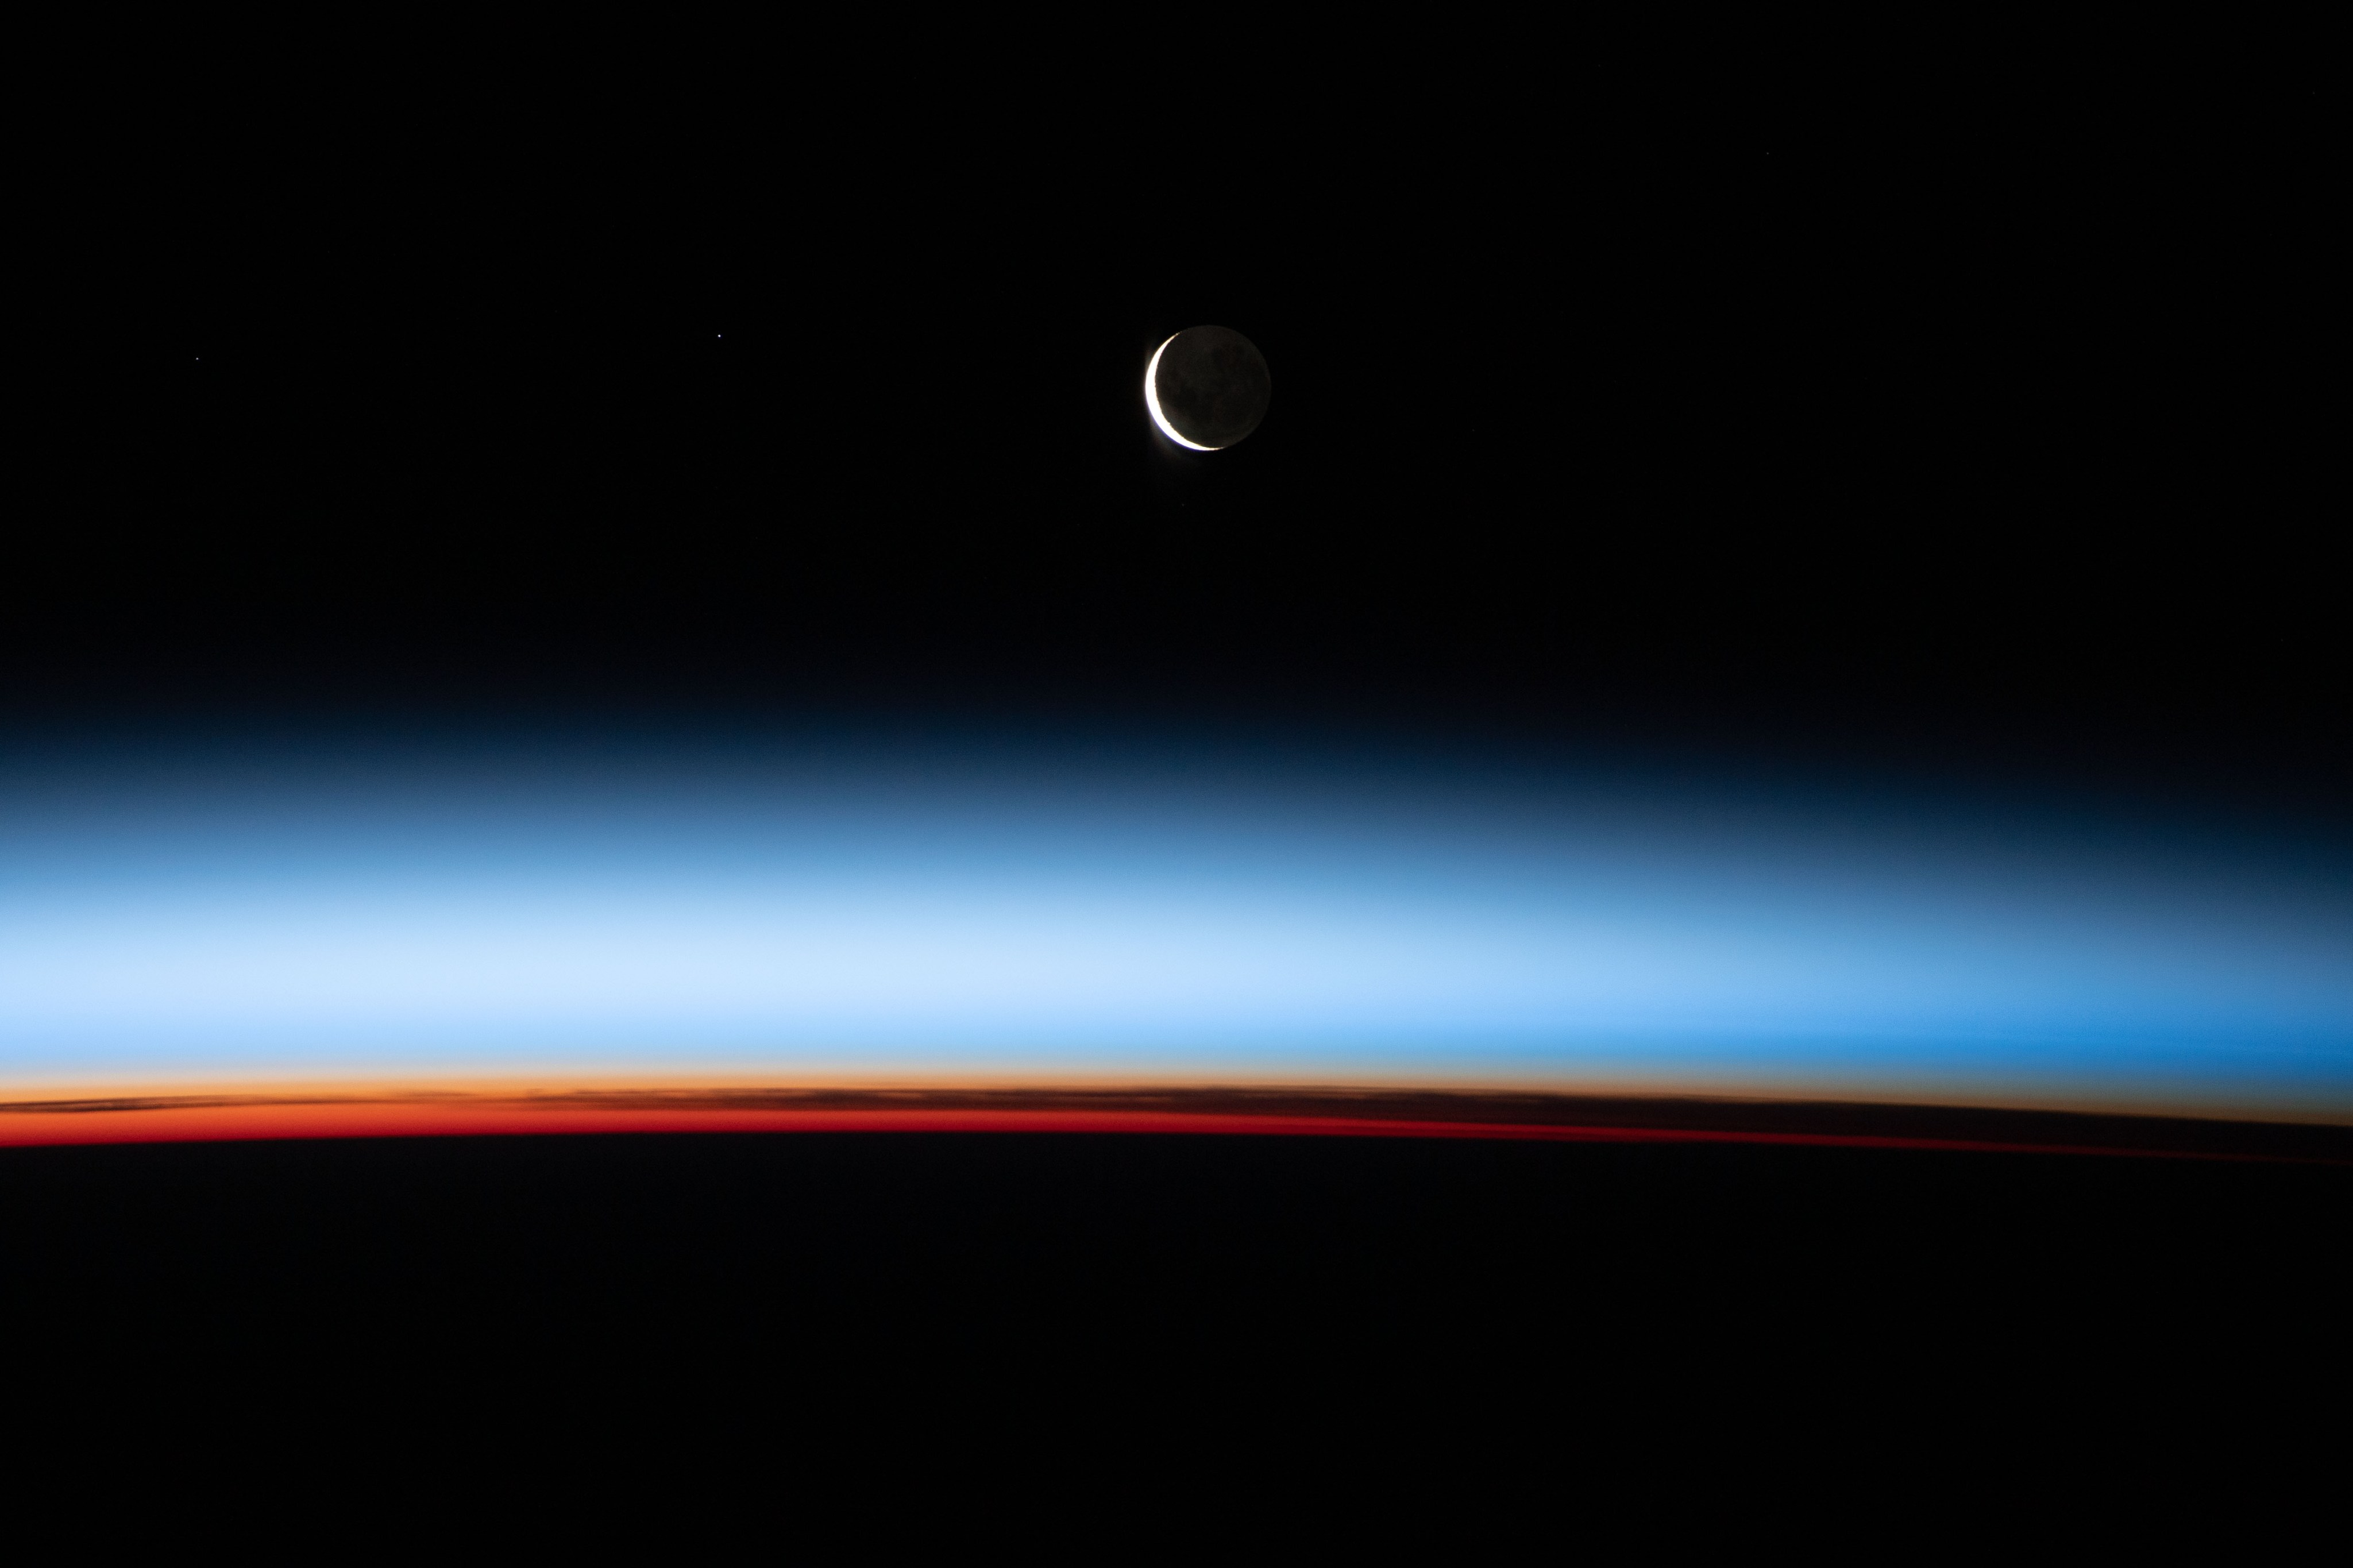 Photograph of a crescent moon in space. Earth's horizon, topped by a thin, glowing layer of atmosphere, fills the bottom edge of the picture.